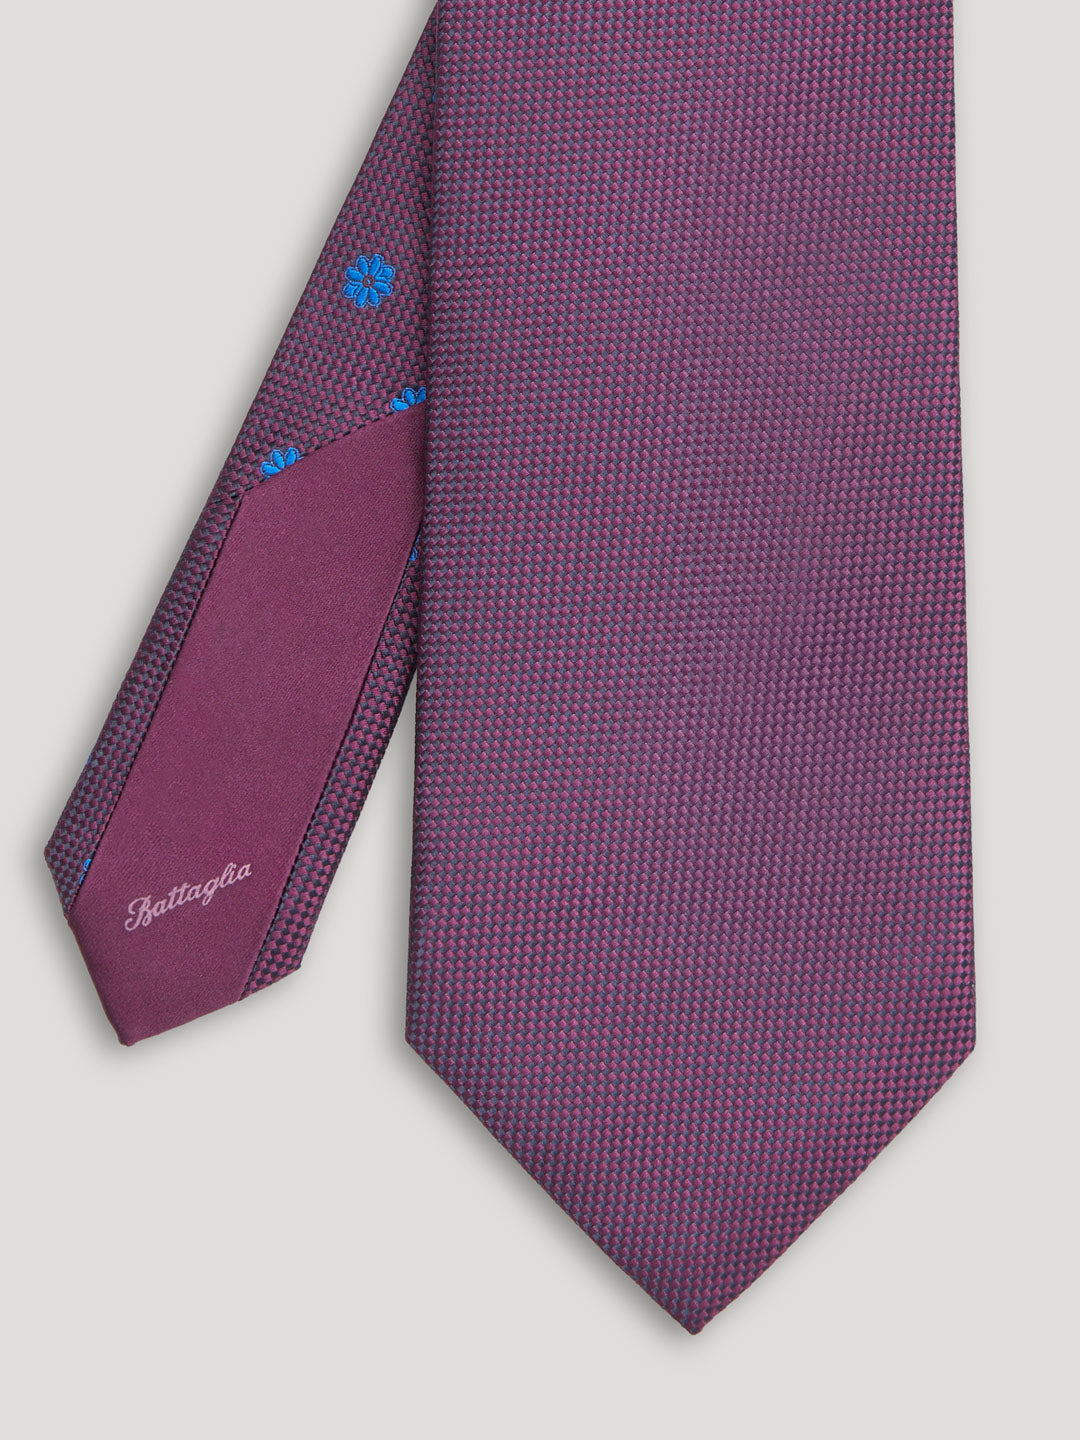 Purple tie with blue small pattern design. 